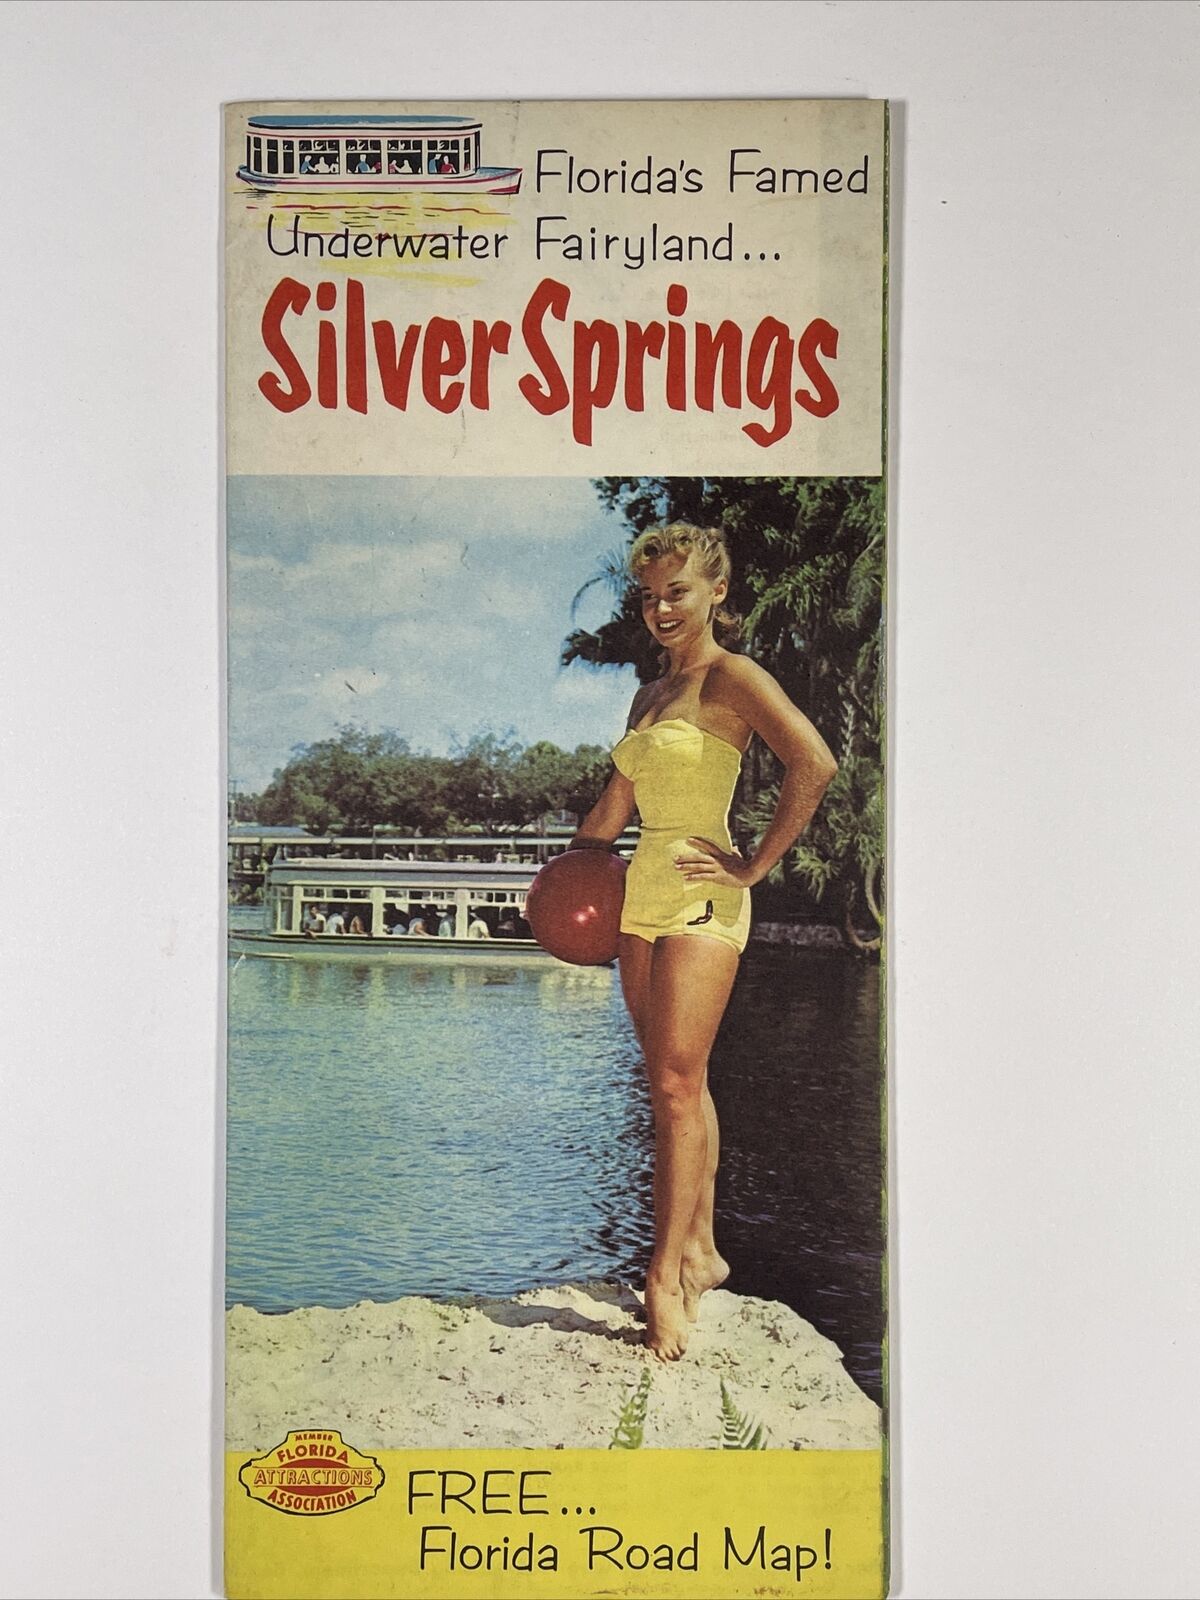 1959 Vintage Florida Silver Springs Glass Bottom Boats and Road Map Brochure